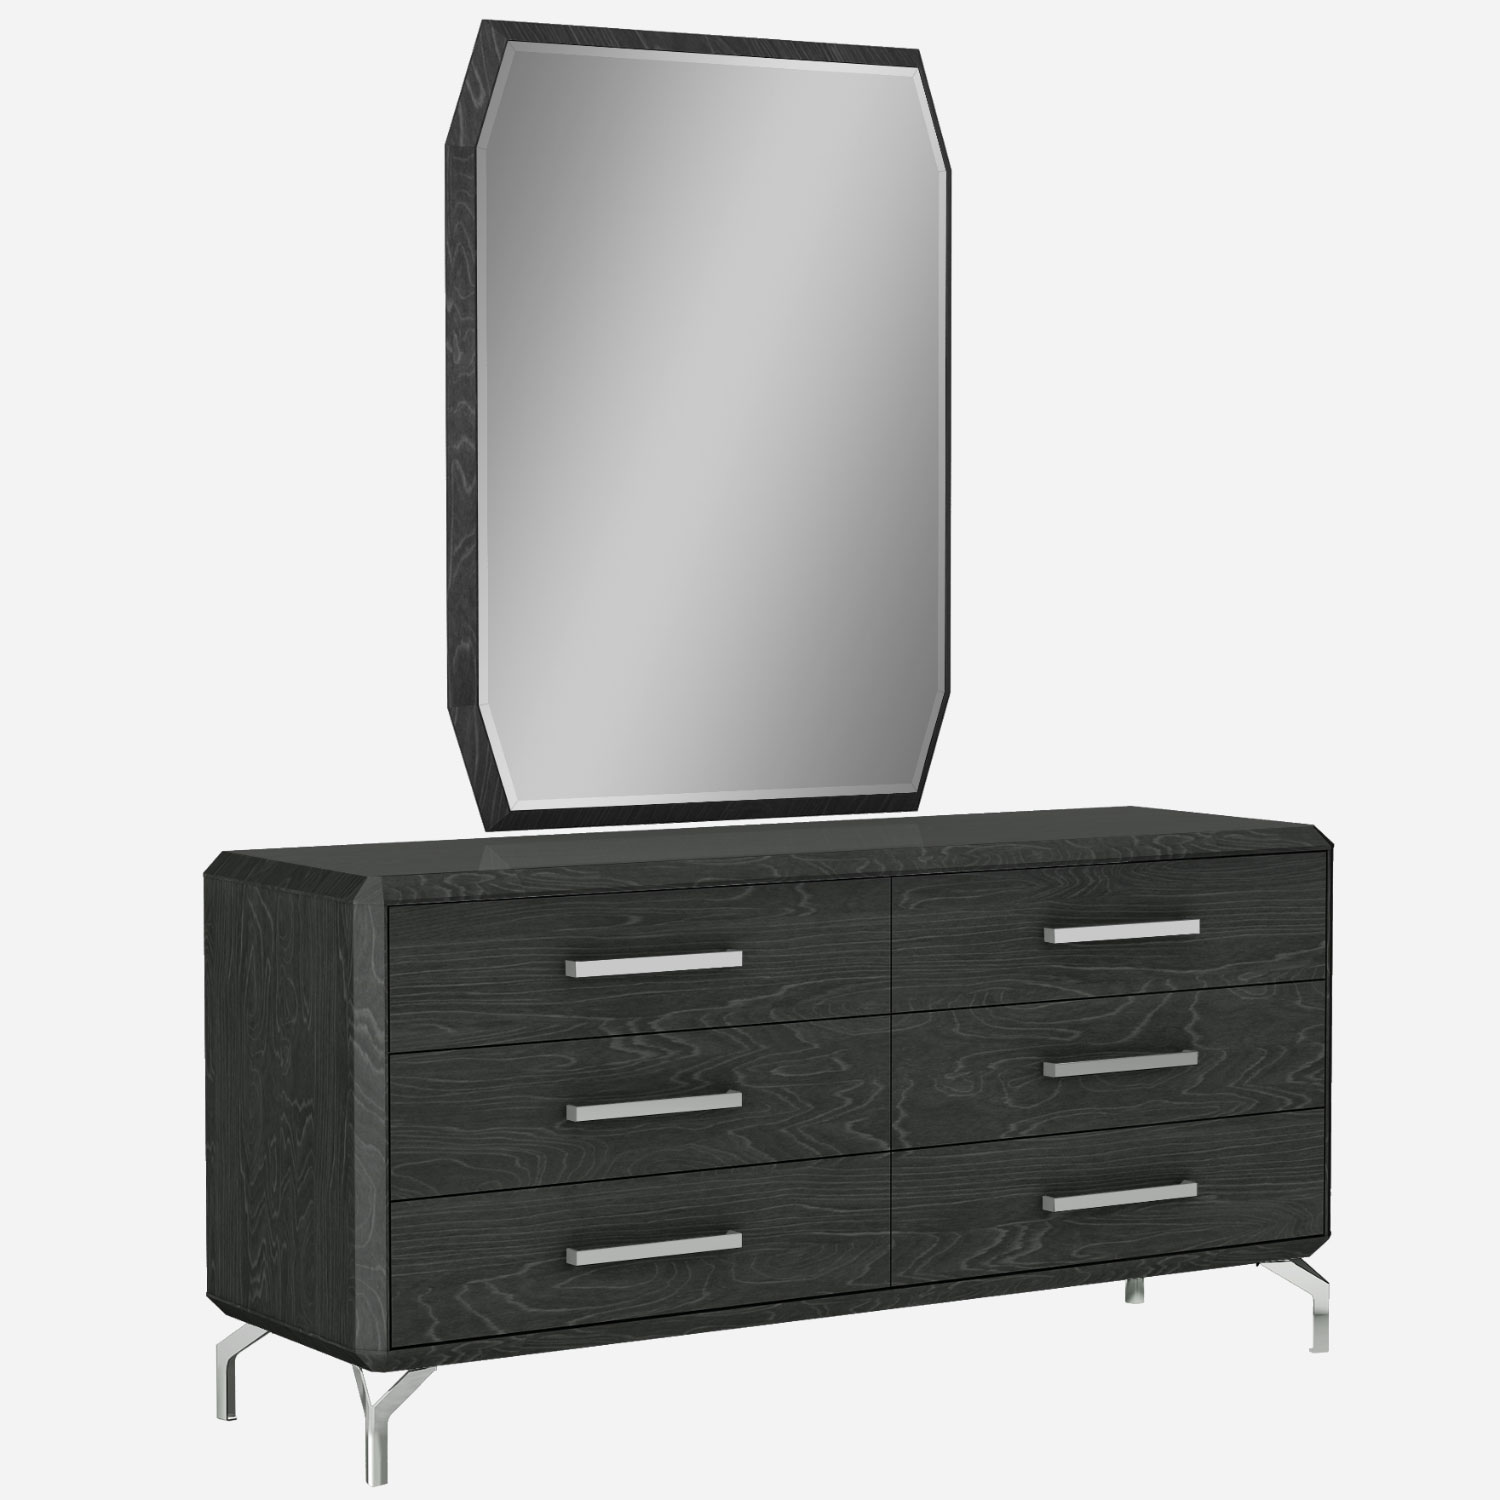 Whiteline Dr1618d Gry Los Angeles Double Dresser In High Gloss